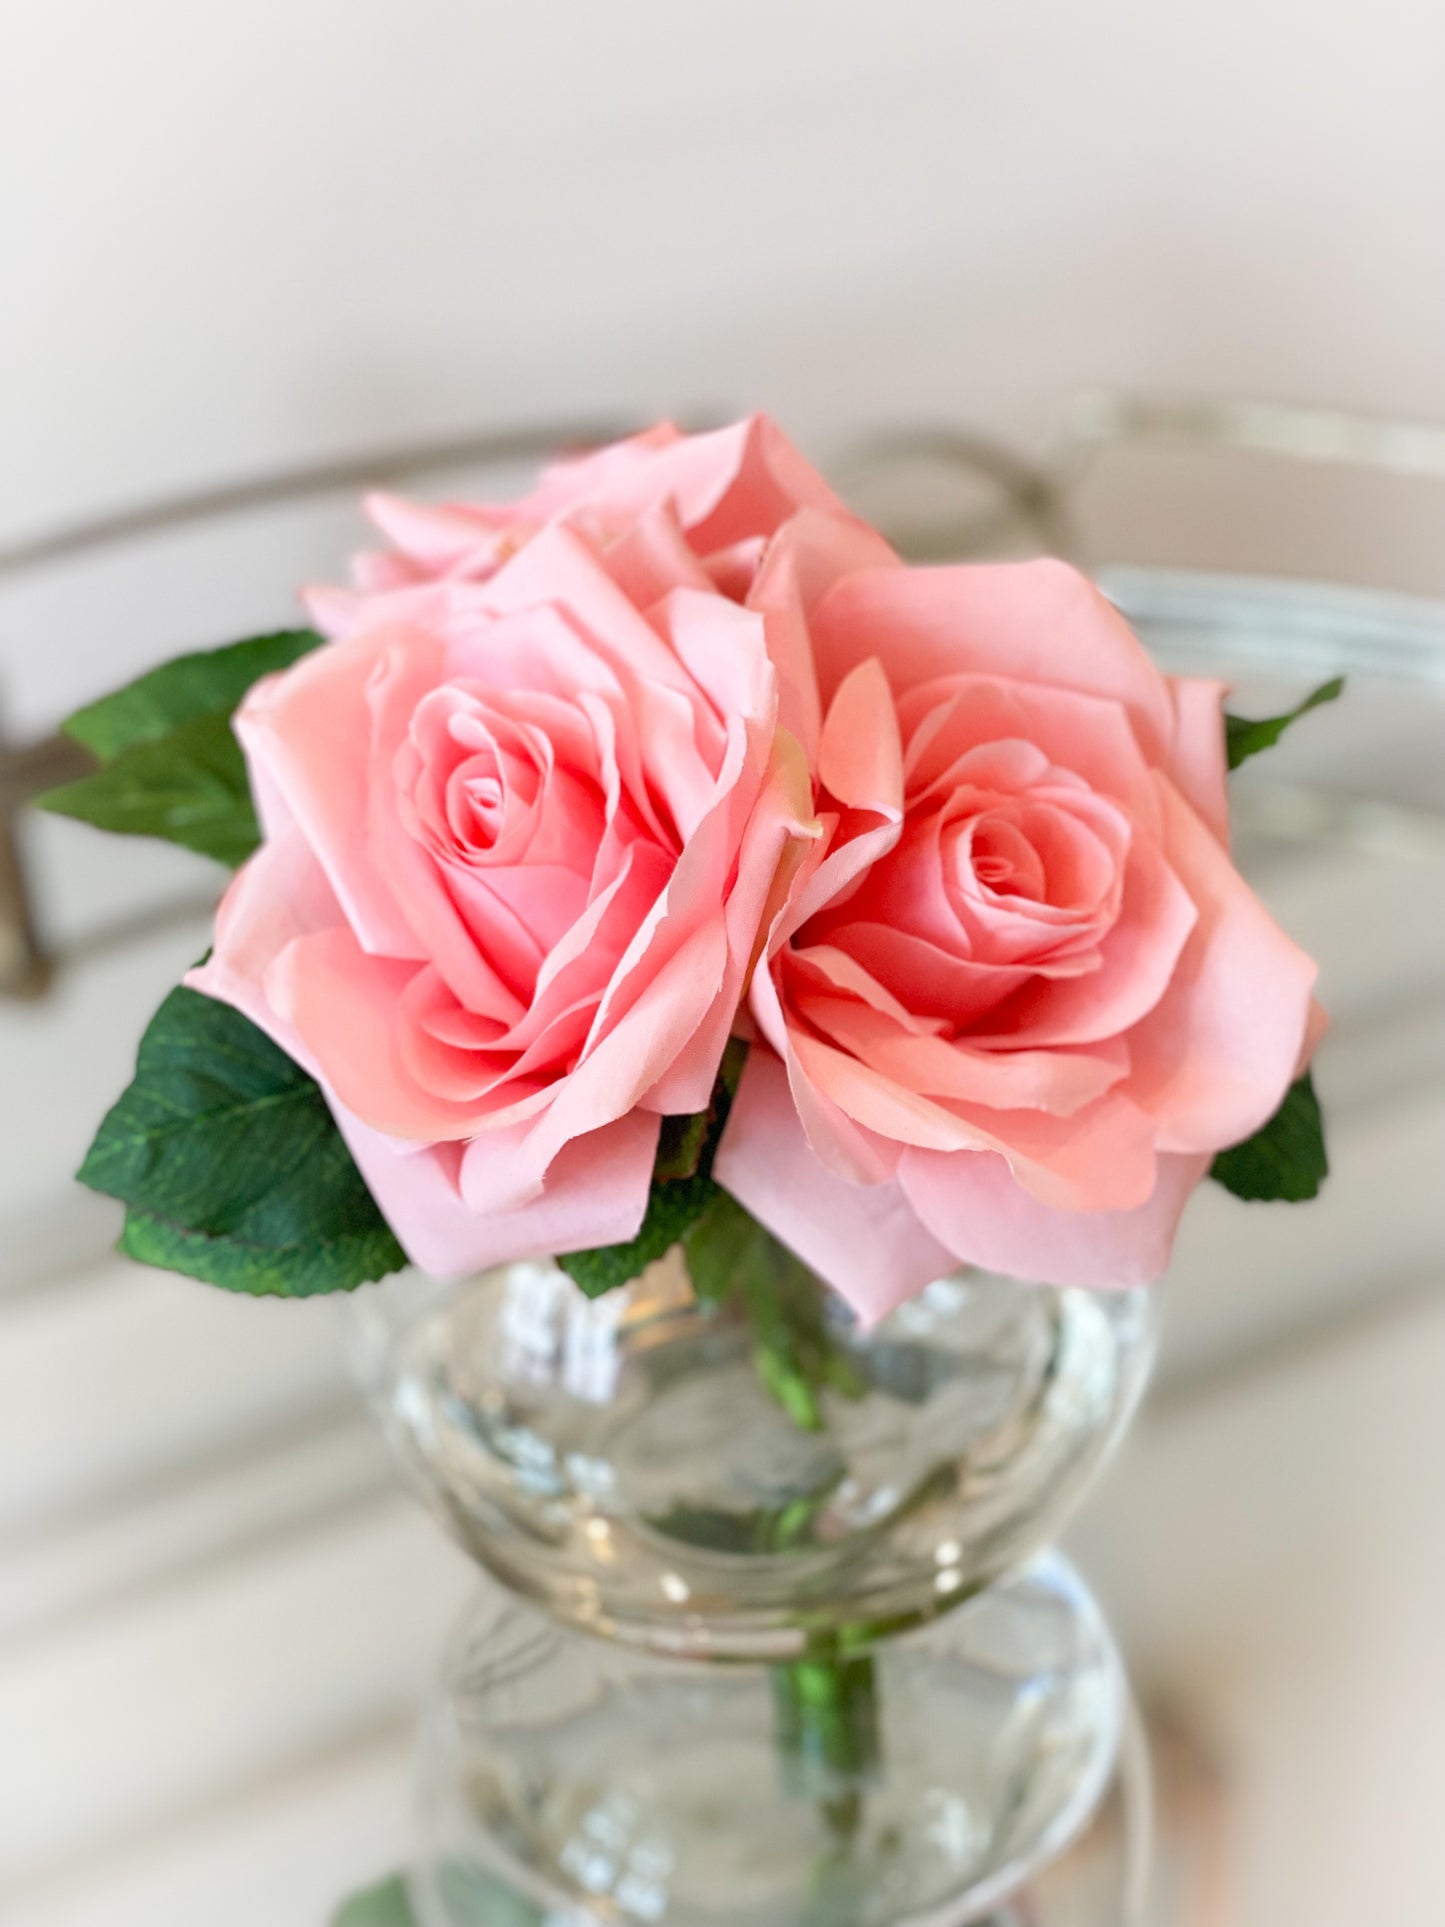 Pink Rose Trio In Glass Vase With Acrylic Water